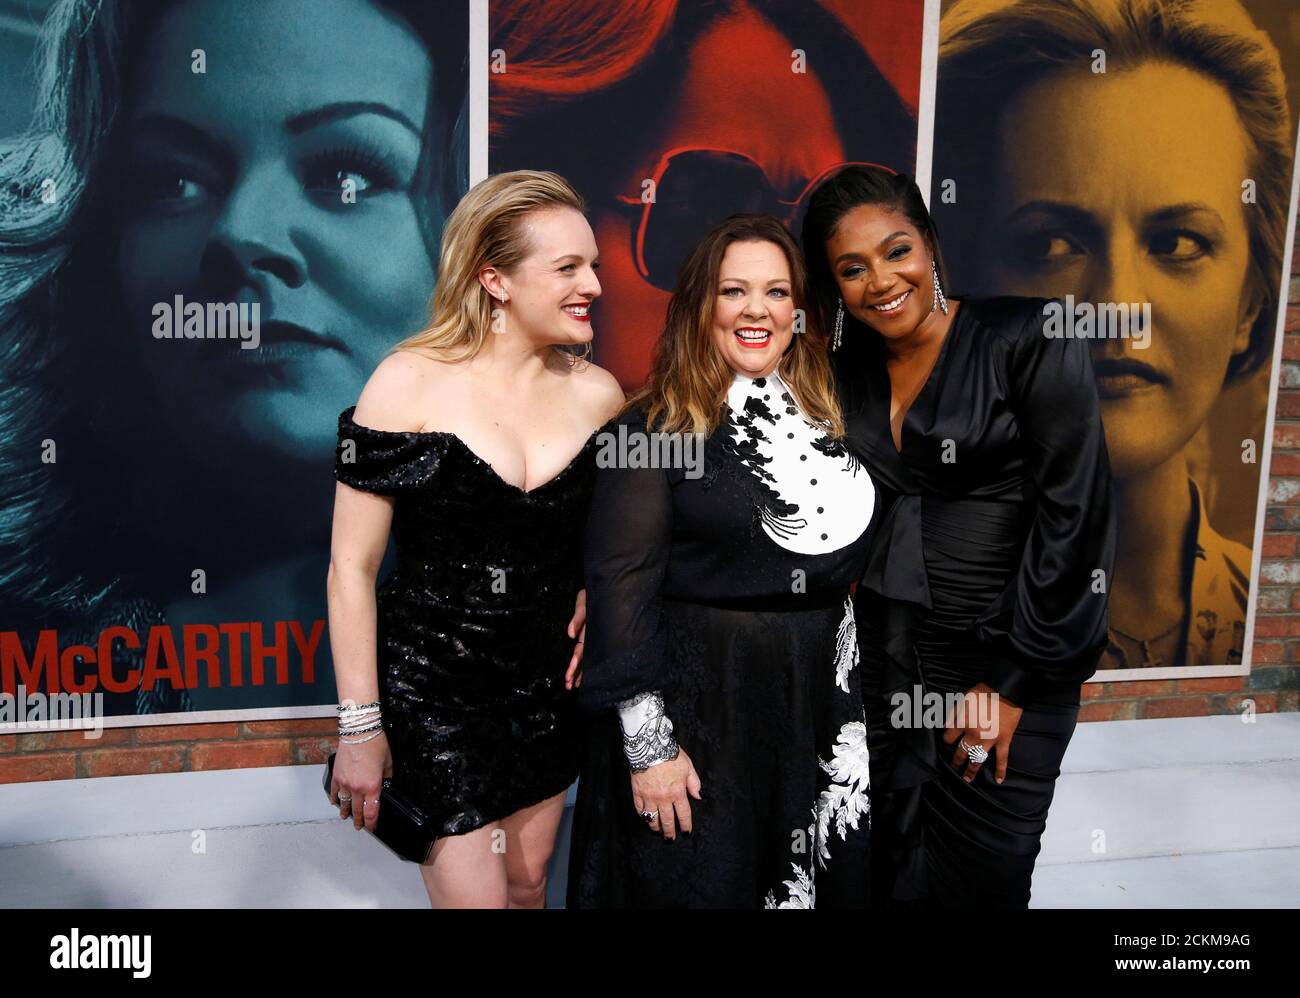 Cast members Tiffany Haddish, Melissa McCarthy and Elisabeth Moss attend the premiere for the movie 'The Kitchen' in Los Angeles, California, U.S., August 5, 2019. REUTERS/Mario Anzuoni Stock Photo